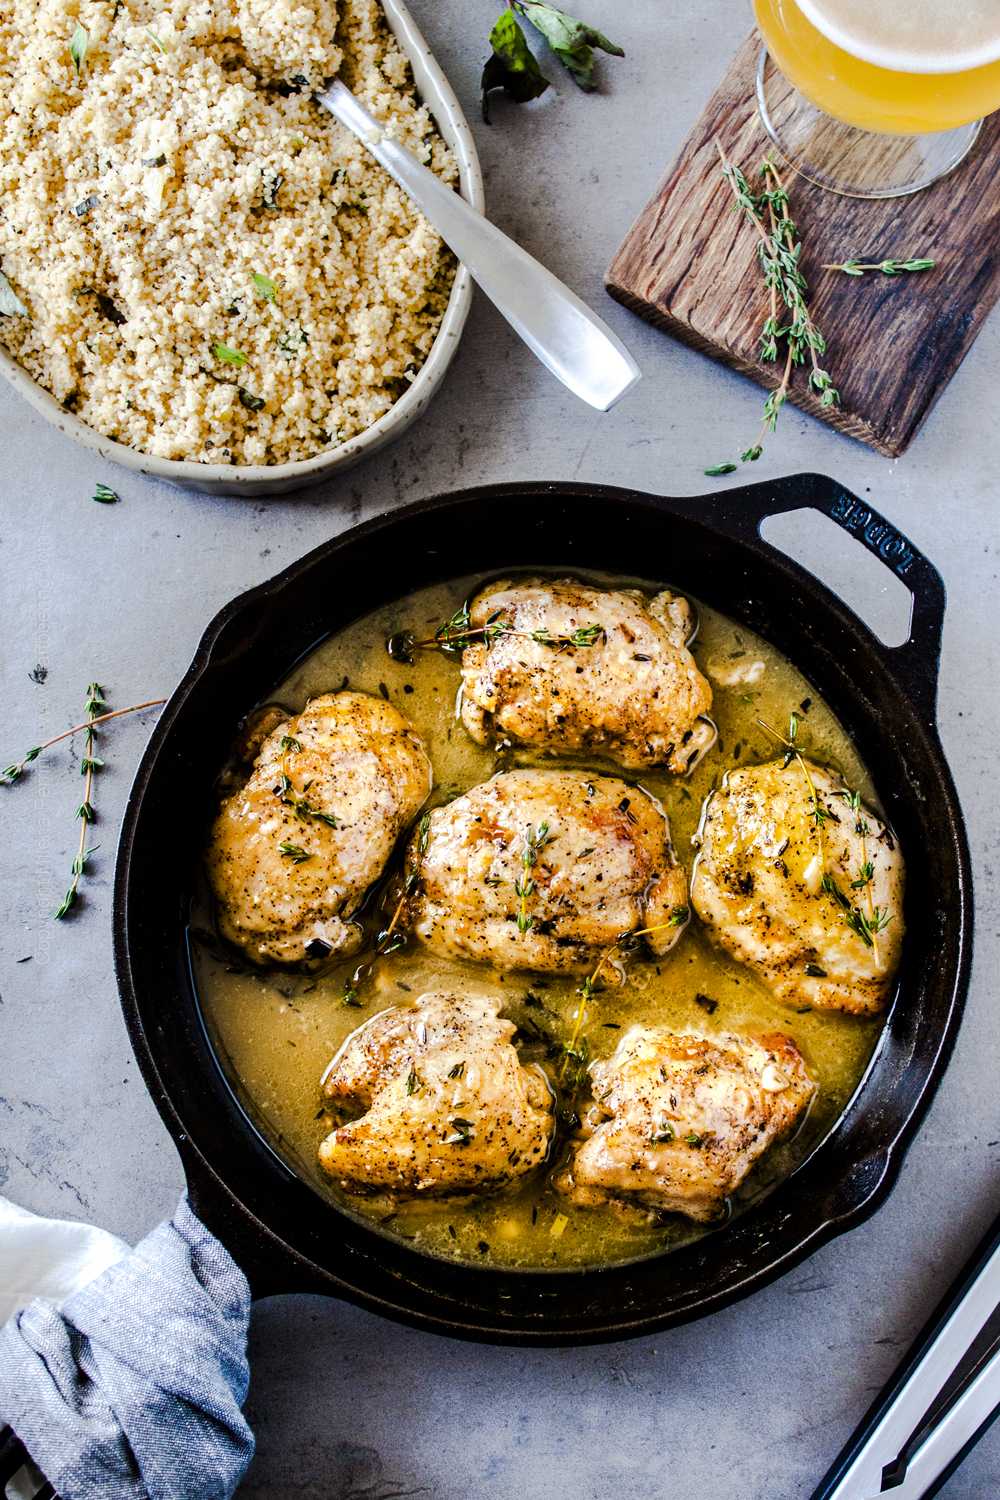 Beer chicken thighs in cast iron skillet. Use boneless skinless chicken thighs and a Belgian ale for the pan sauce, serve alongside herbed couscous.